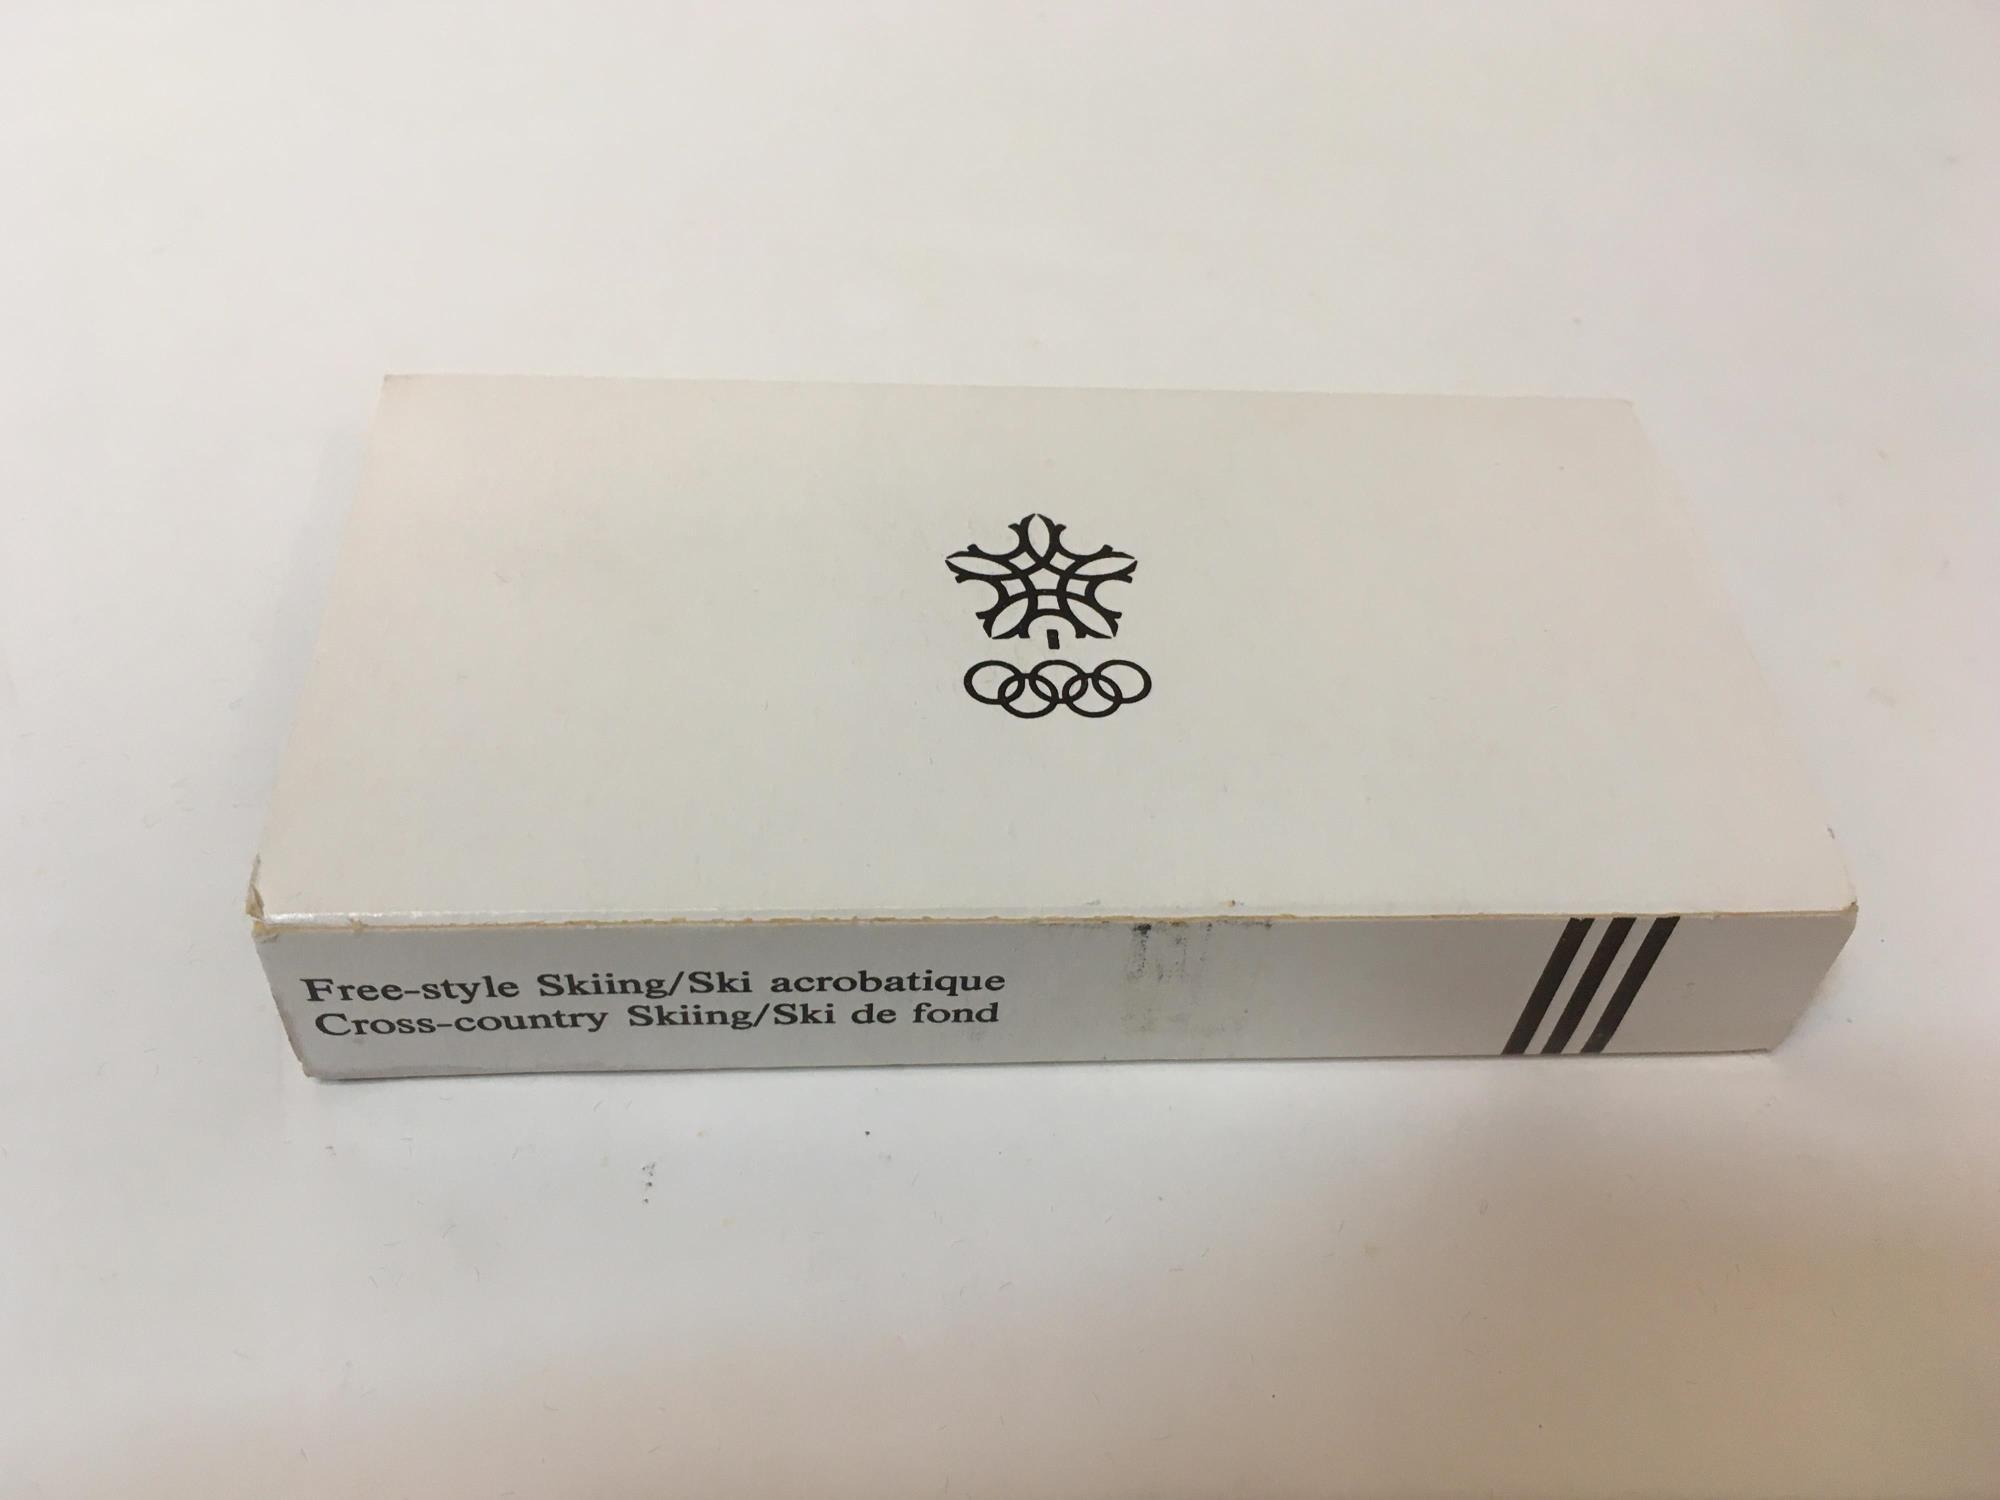 2 CALGERY 1988 OLYMPIC STERLING PROOF COINS